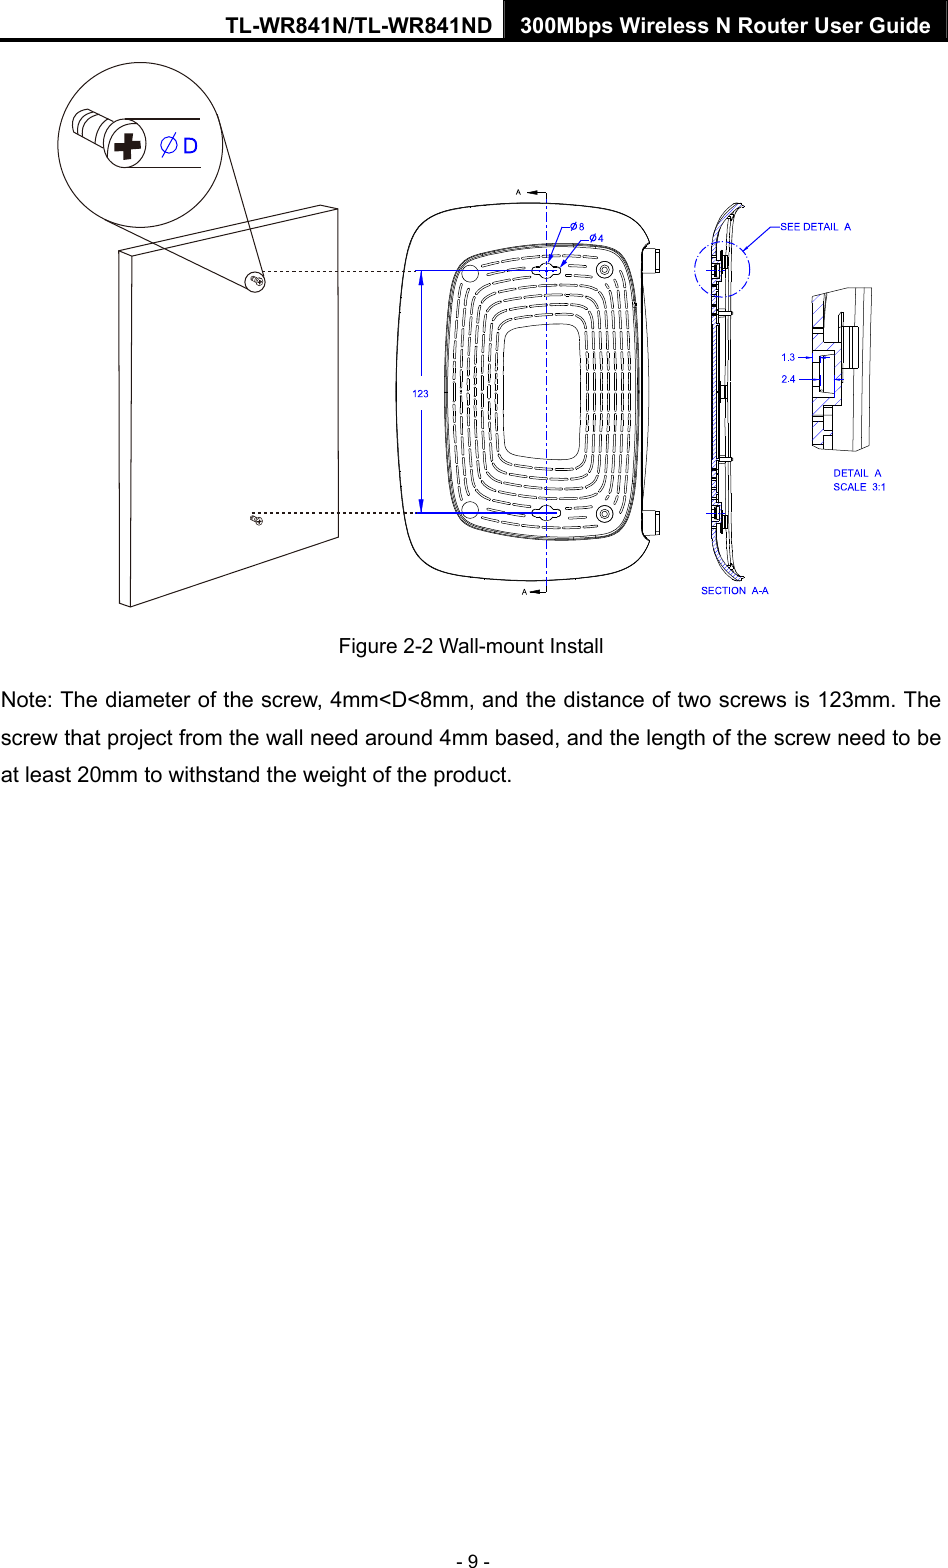 TL-WR841N/TL-WR841ND 300Mbps Wireless N Router User Guide - 9 -  Figure 2-2 Wall-mount Install Note: The diameter of the screw, 4mm&lt;D&lt;8mm, and the distance of two screws is 123mm. The screw that project from the wall need around 4mm based, and the length of the screw need to be at least 20mm to withstand the weight of the product. 